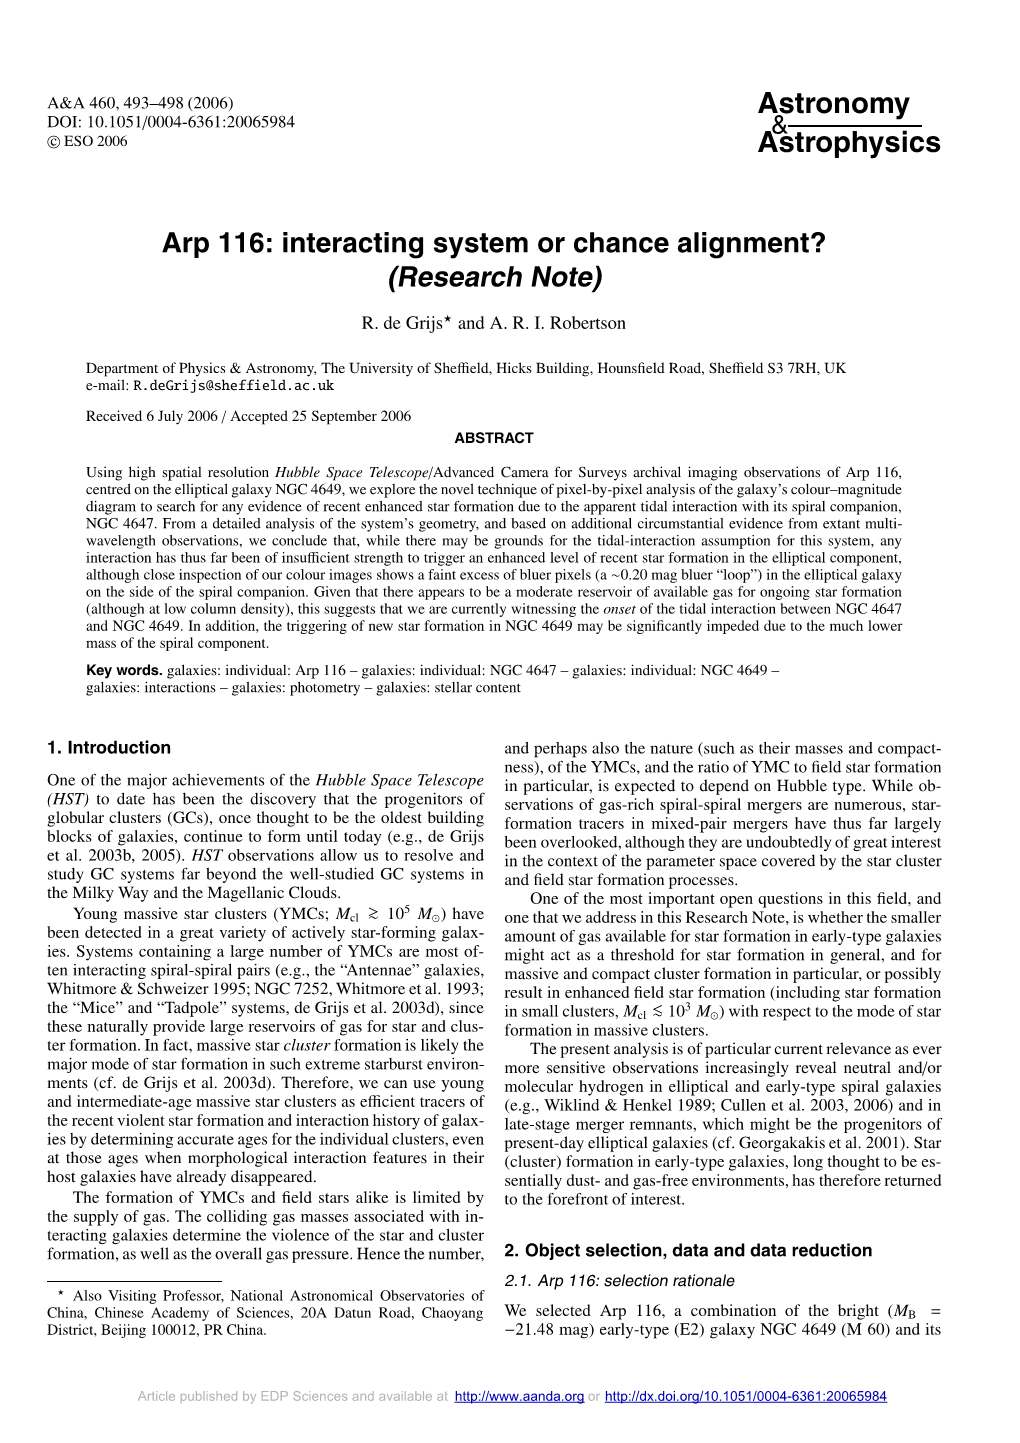 Arp 116: Interacting System Or Chance Alignment? (Research Note)